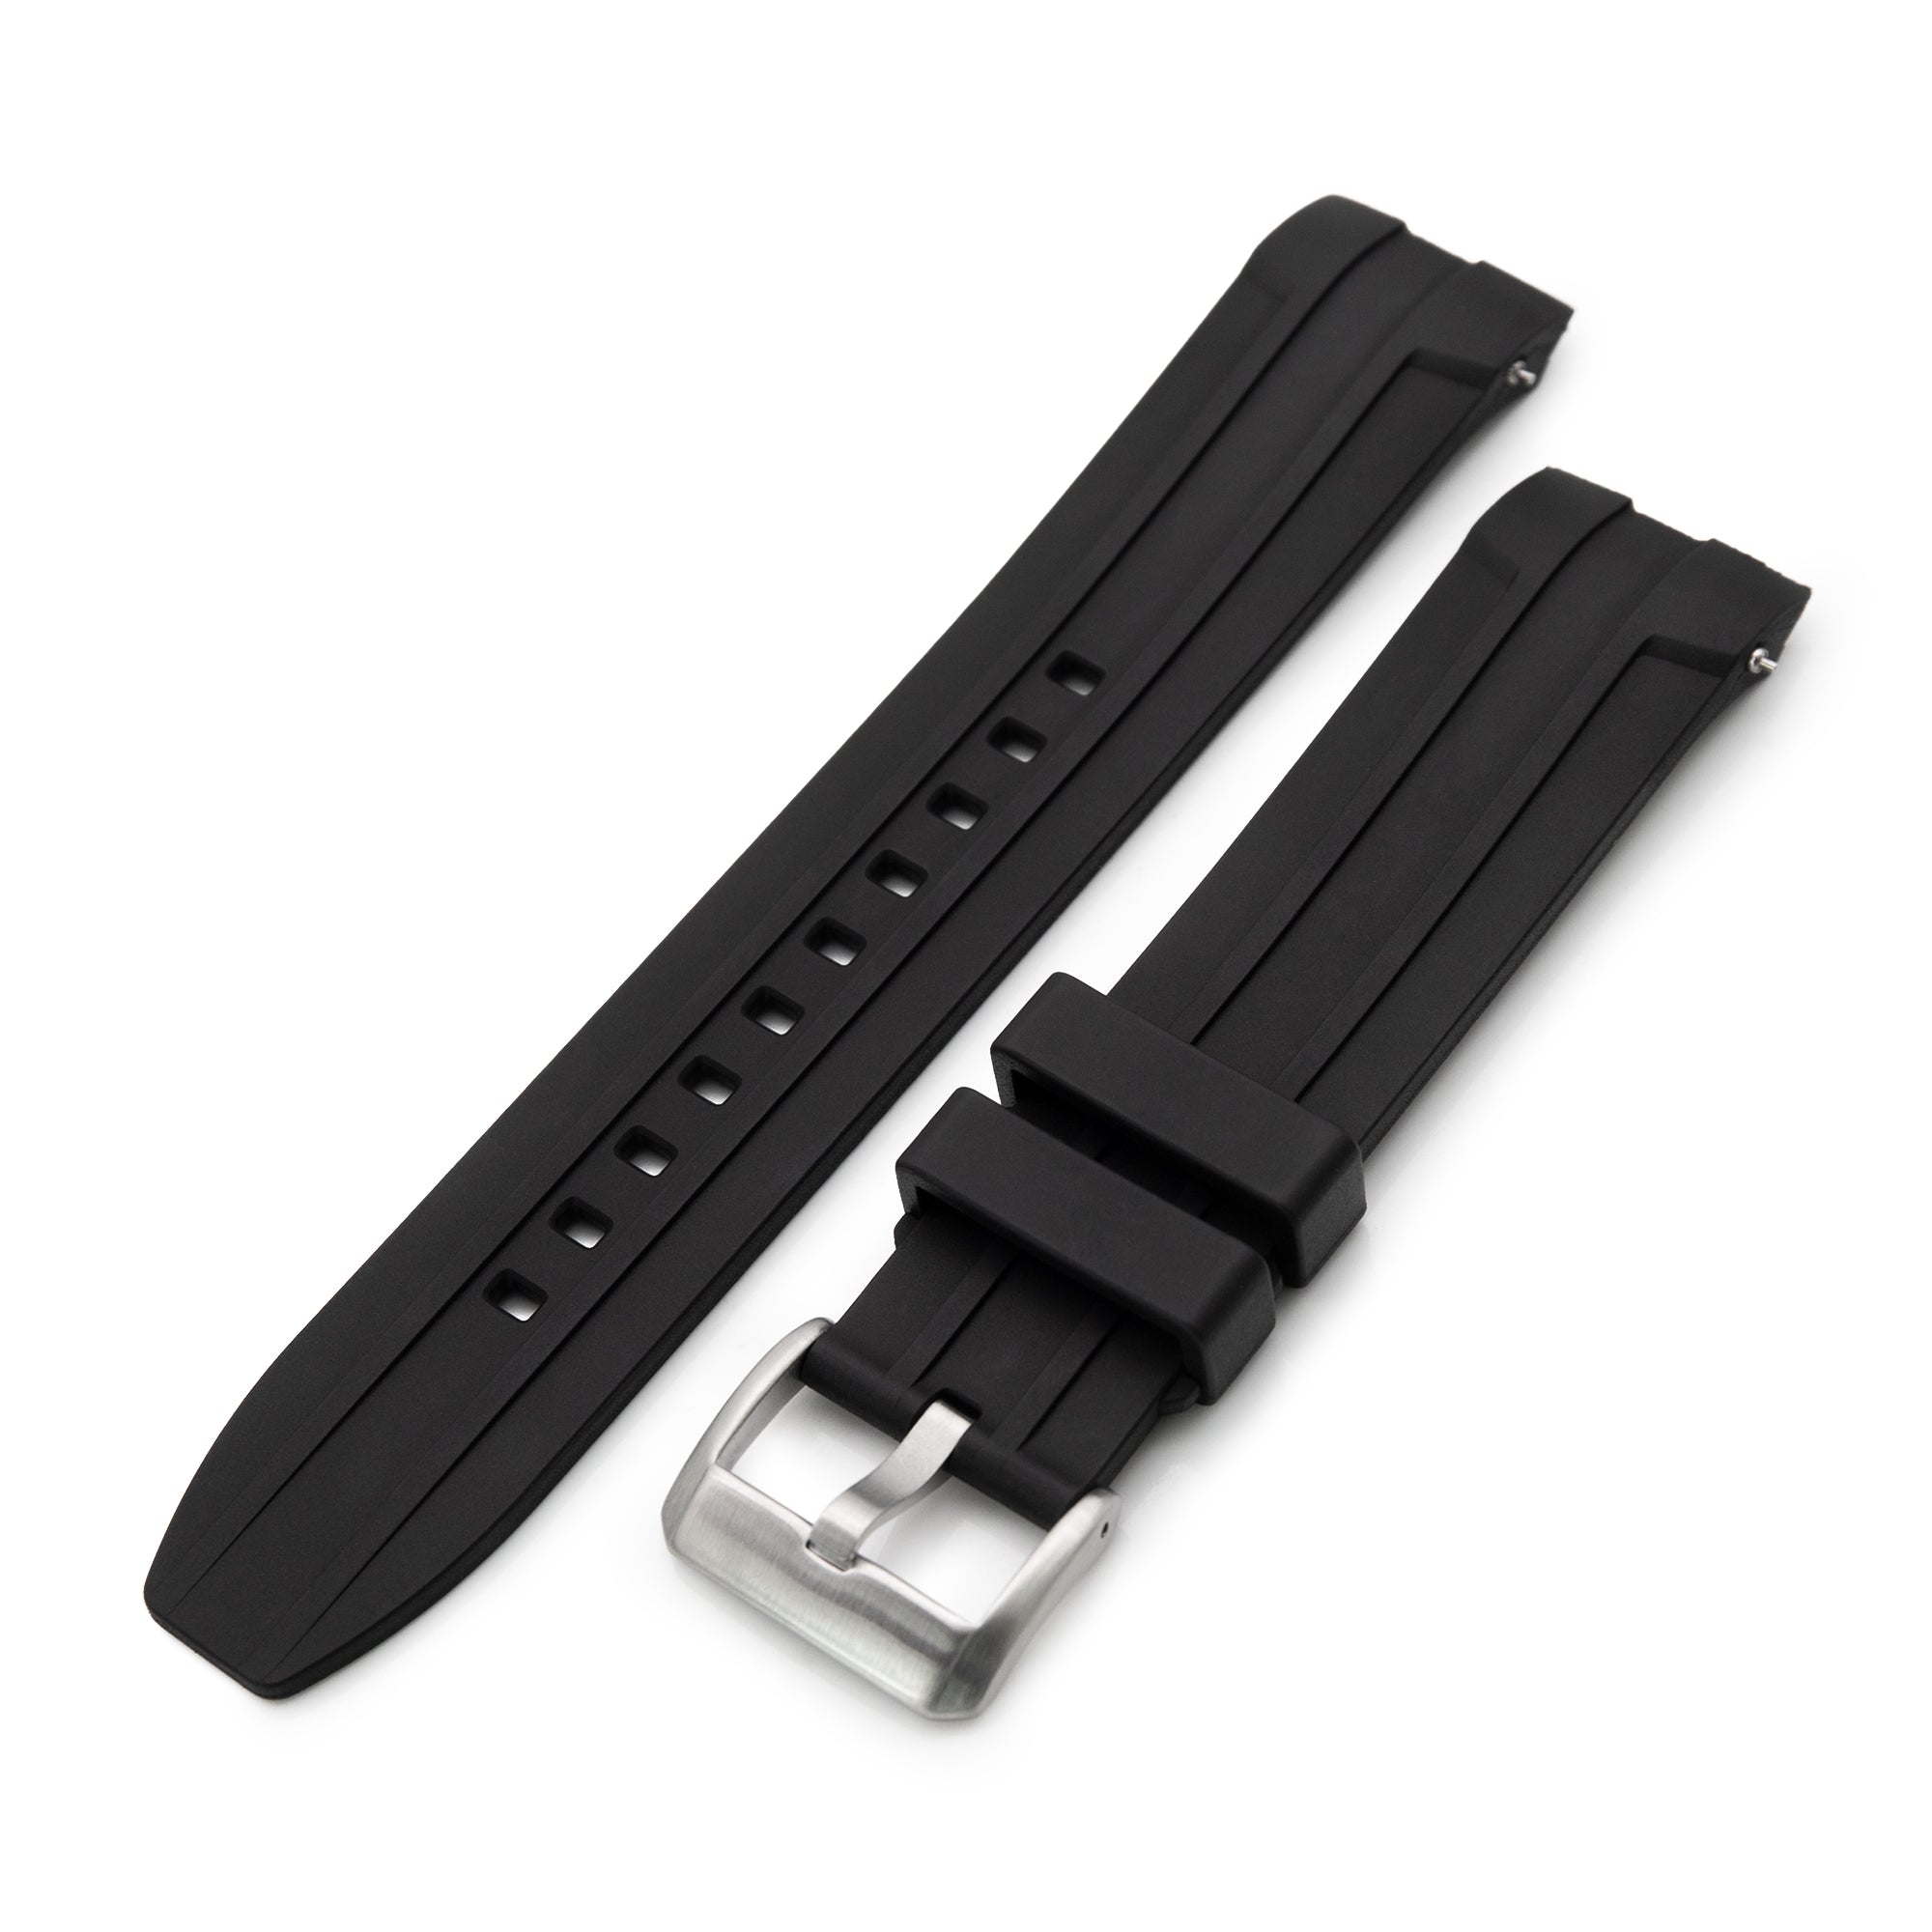 StrapXPro Premium Series - LXH1C Rubber Strap for Longines Hydroconquest Conquest Series Black Strapcode Watch Bands